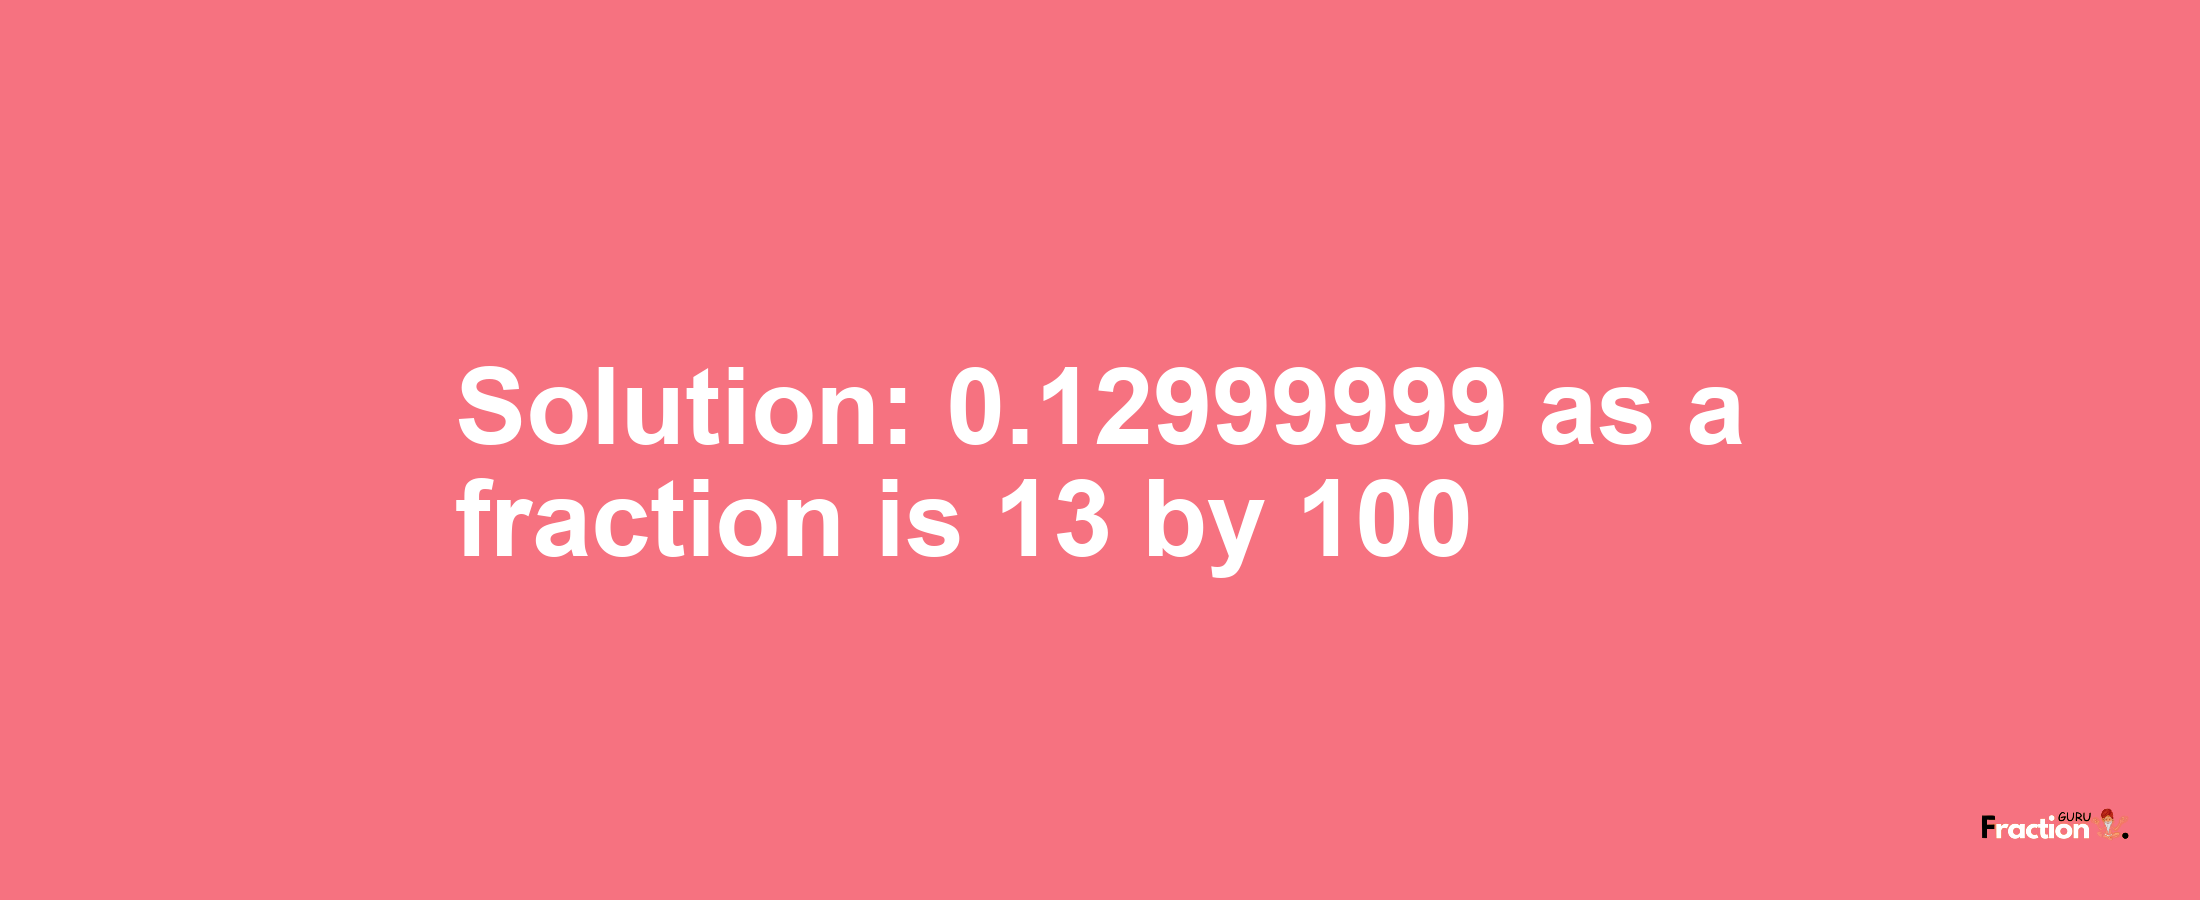 Solution:0.12999999 as a fraction is 13/100